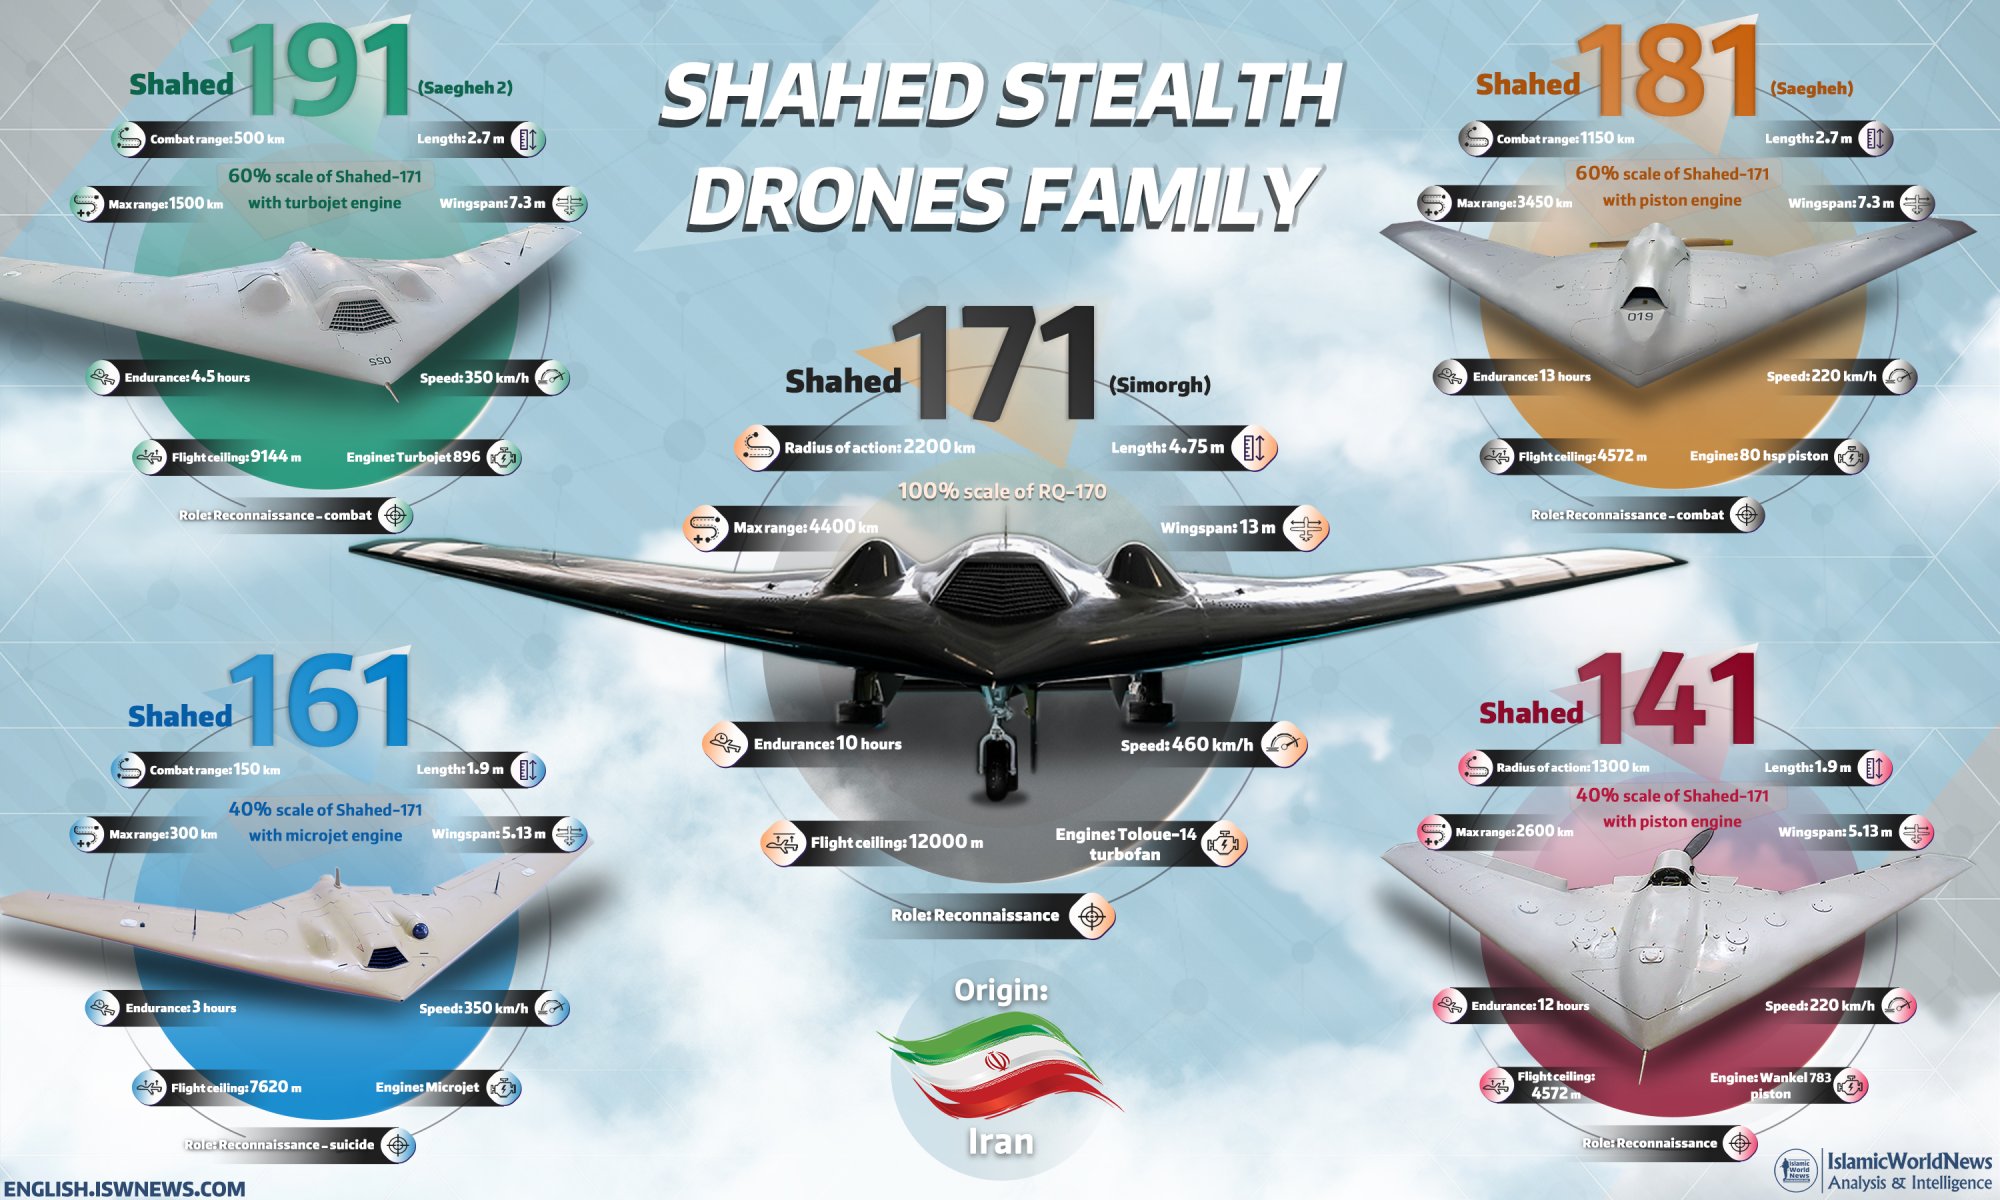 Shahed-171-drone-Shahed-stealth-drones-family-EN.jpg